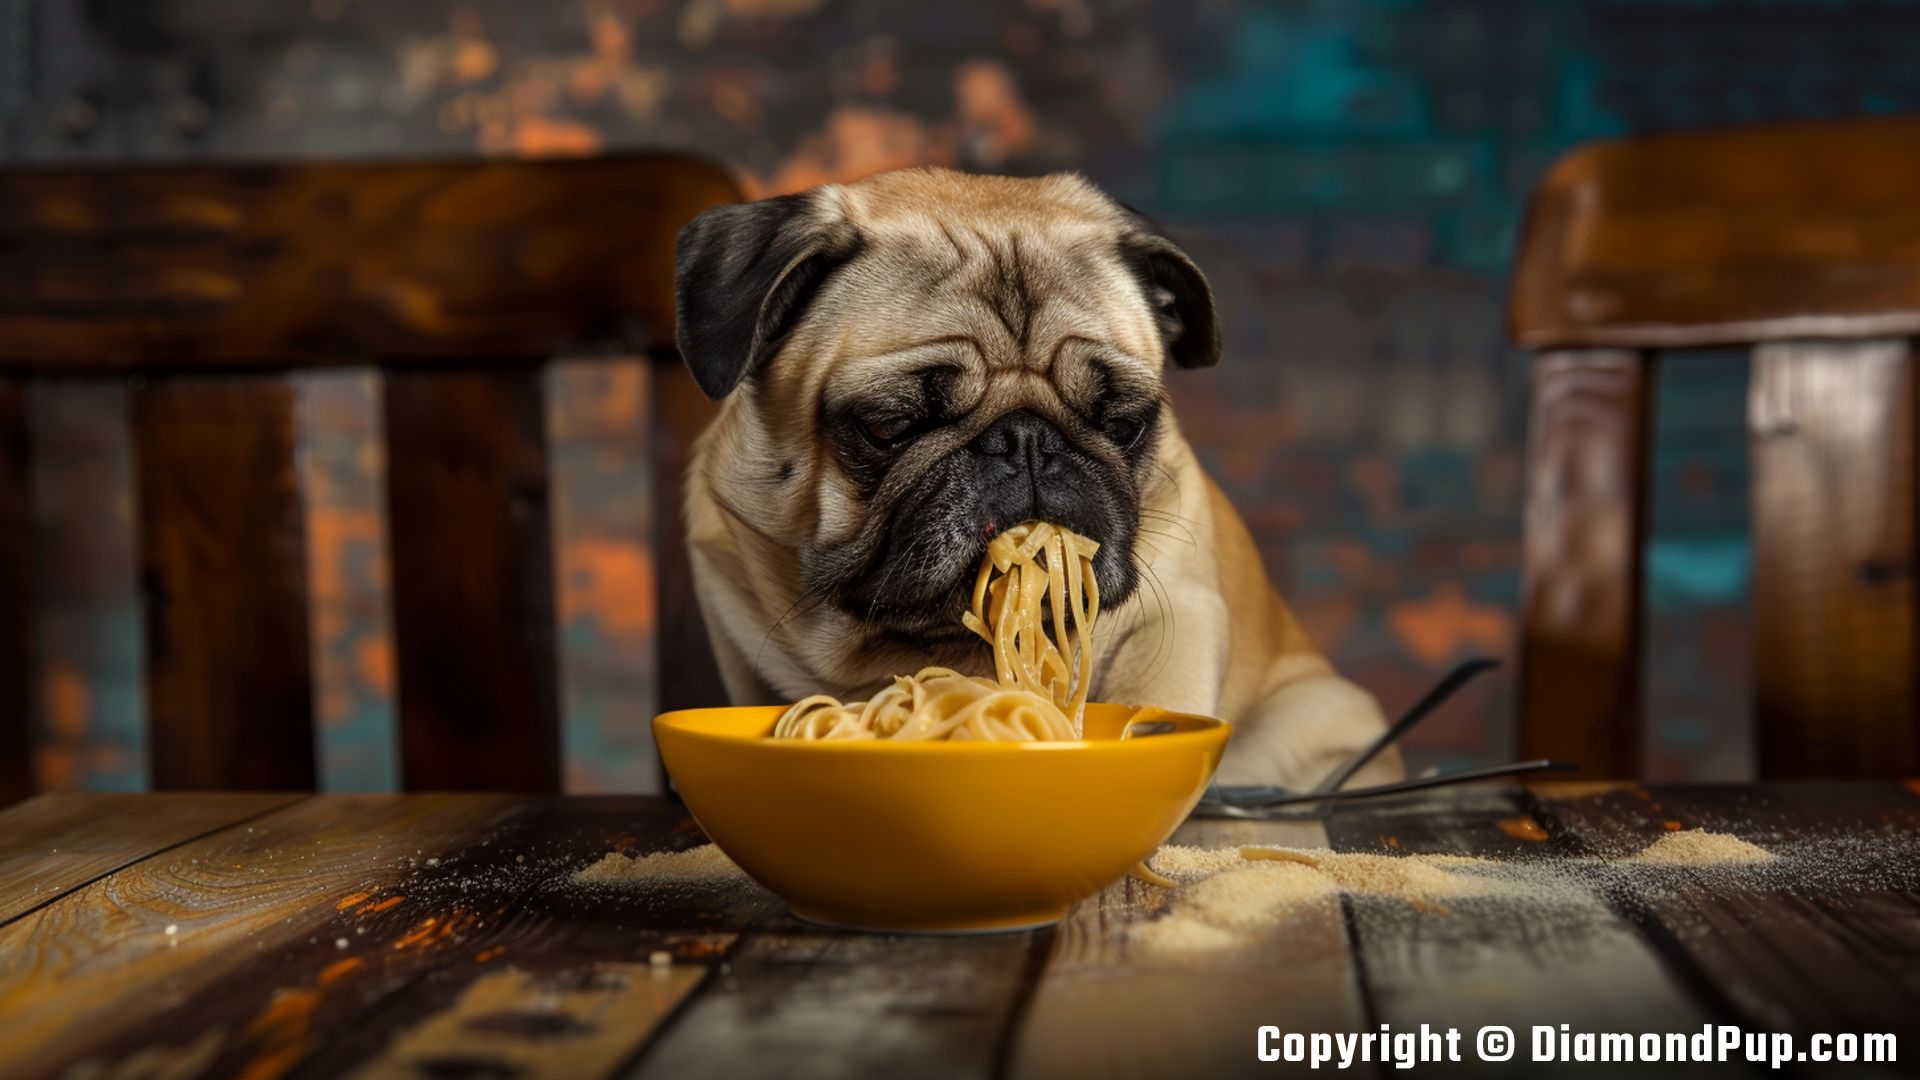 Photograph of an Adorable Pug Snacking on Pasta